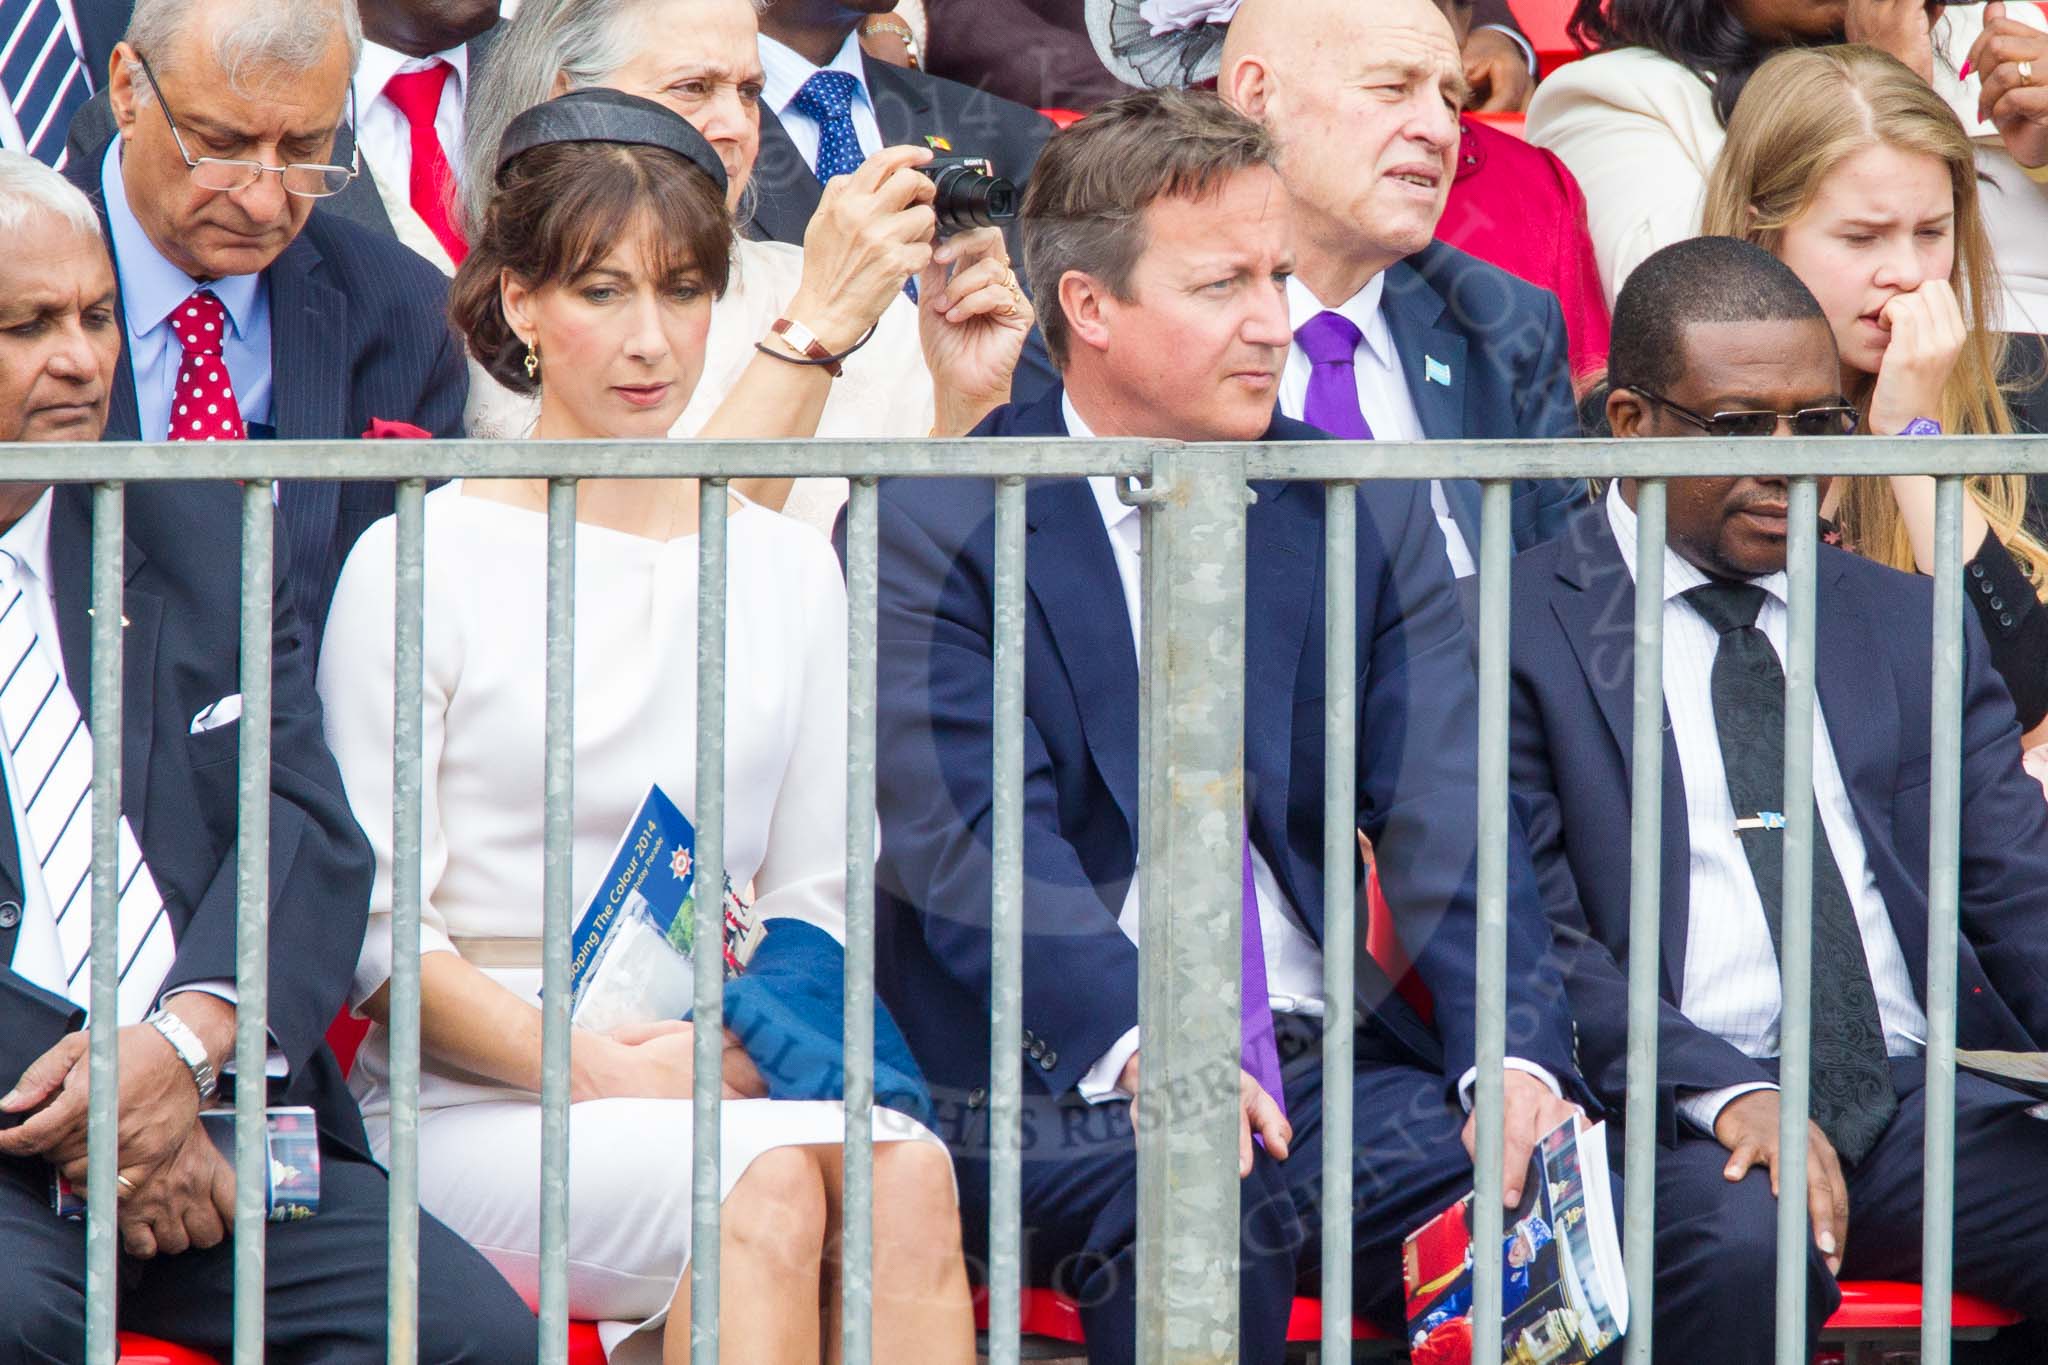 Trooping the Colour 2014.
Horse Guards Parade, Westminster,
London SW1A,

United Kingdom,
on 14 June 2014 at 11:12, image #462